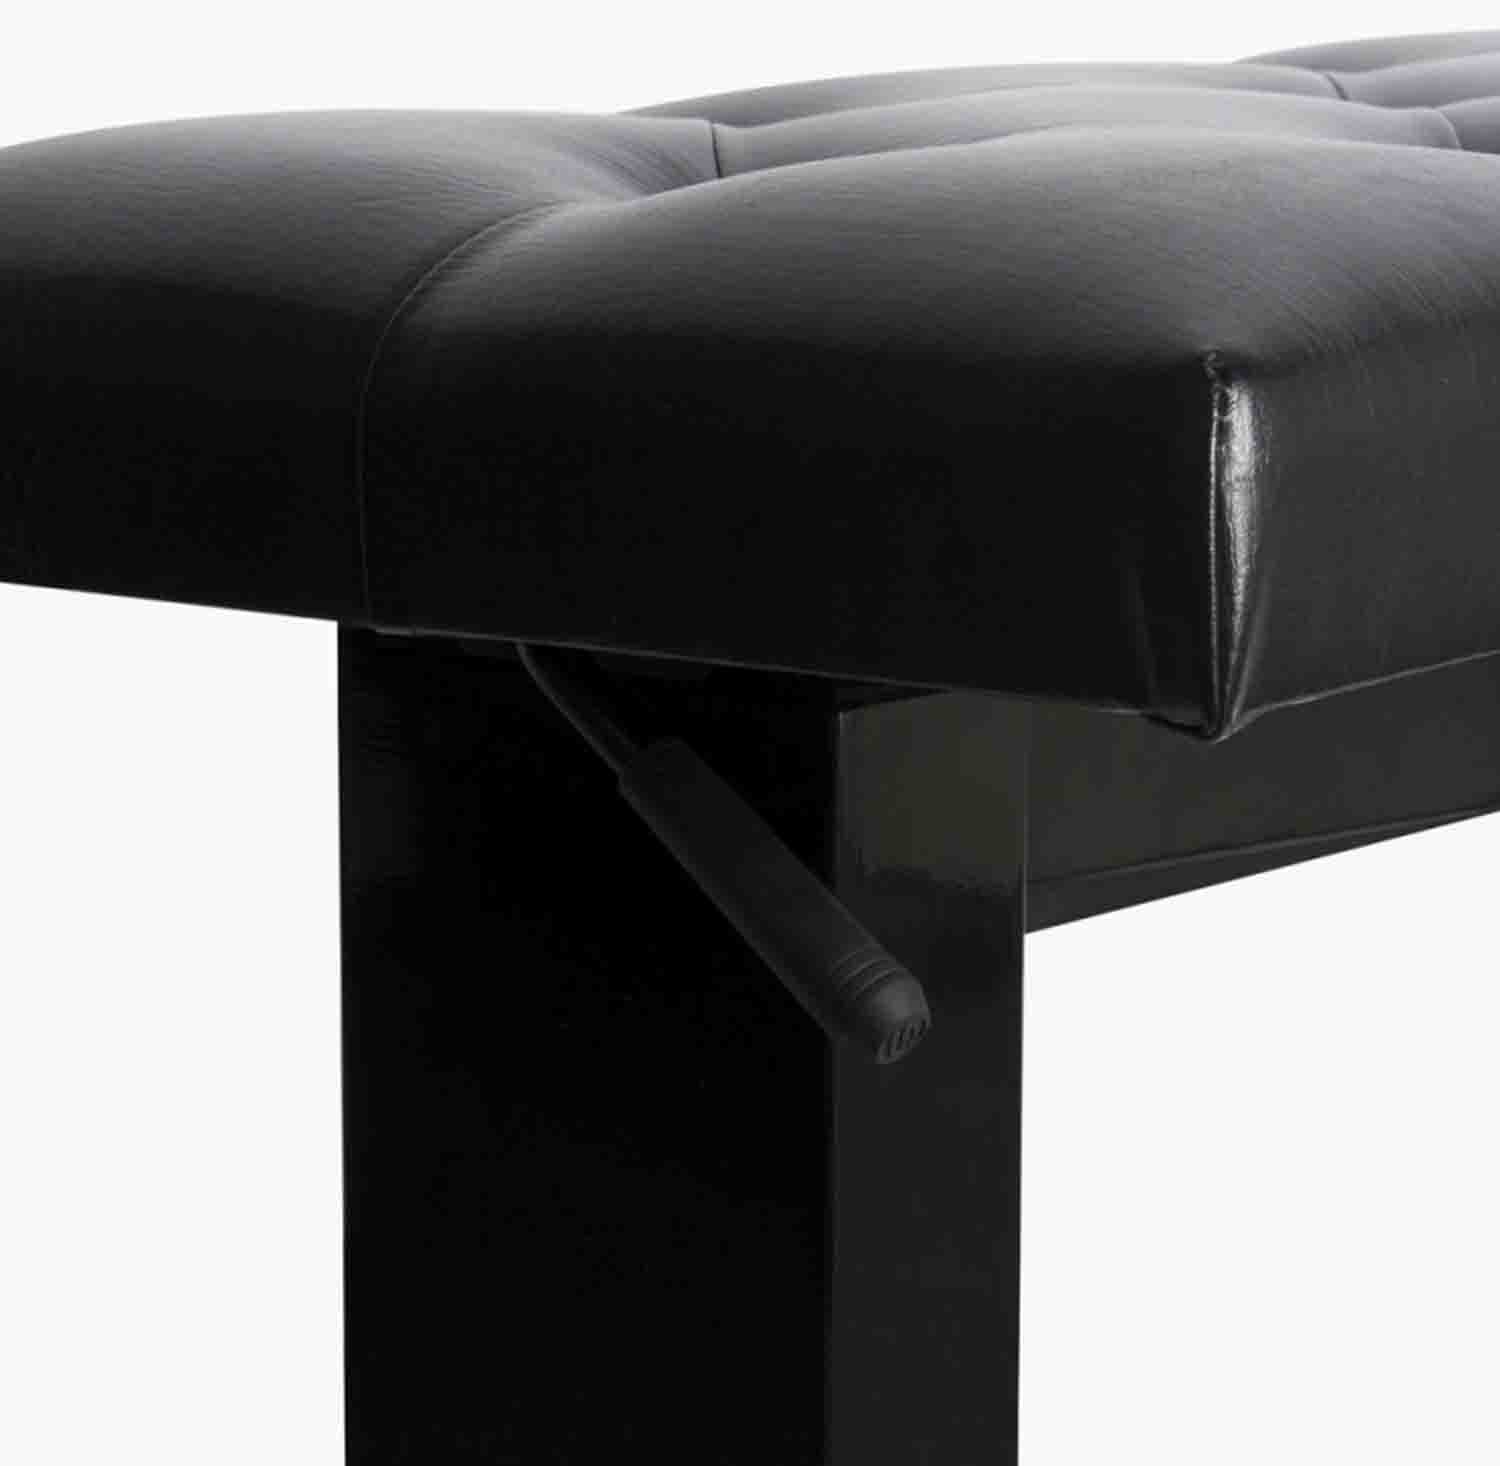 Onstage KB9503B Piano Bench with Adjustable Height - Black - Hollywood DJ